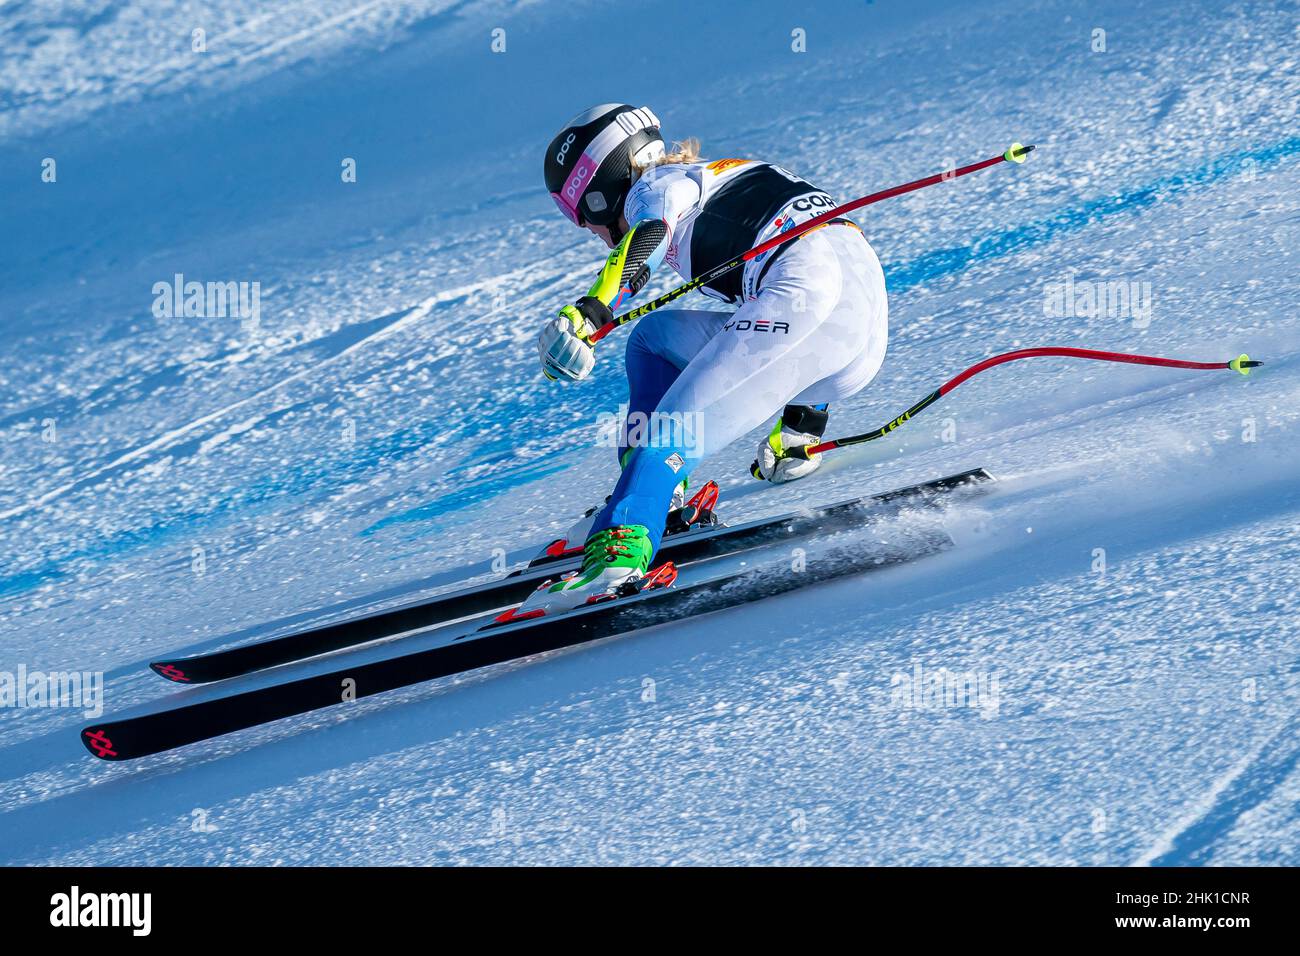 Cortina d'Ampezzo, Italy. 23 January 2022. LEBEL Maureen (USA) competing in the Fis Alpine Ski World Cup Women's Super-G on the Olympia delle Tofane. Stock Photo